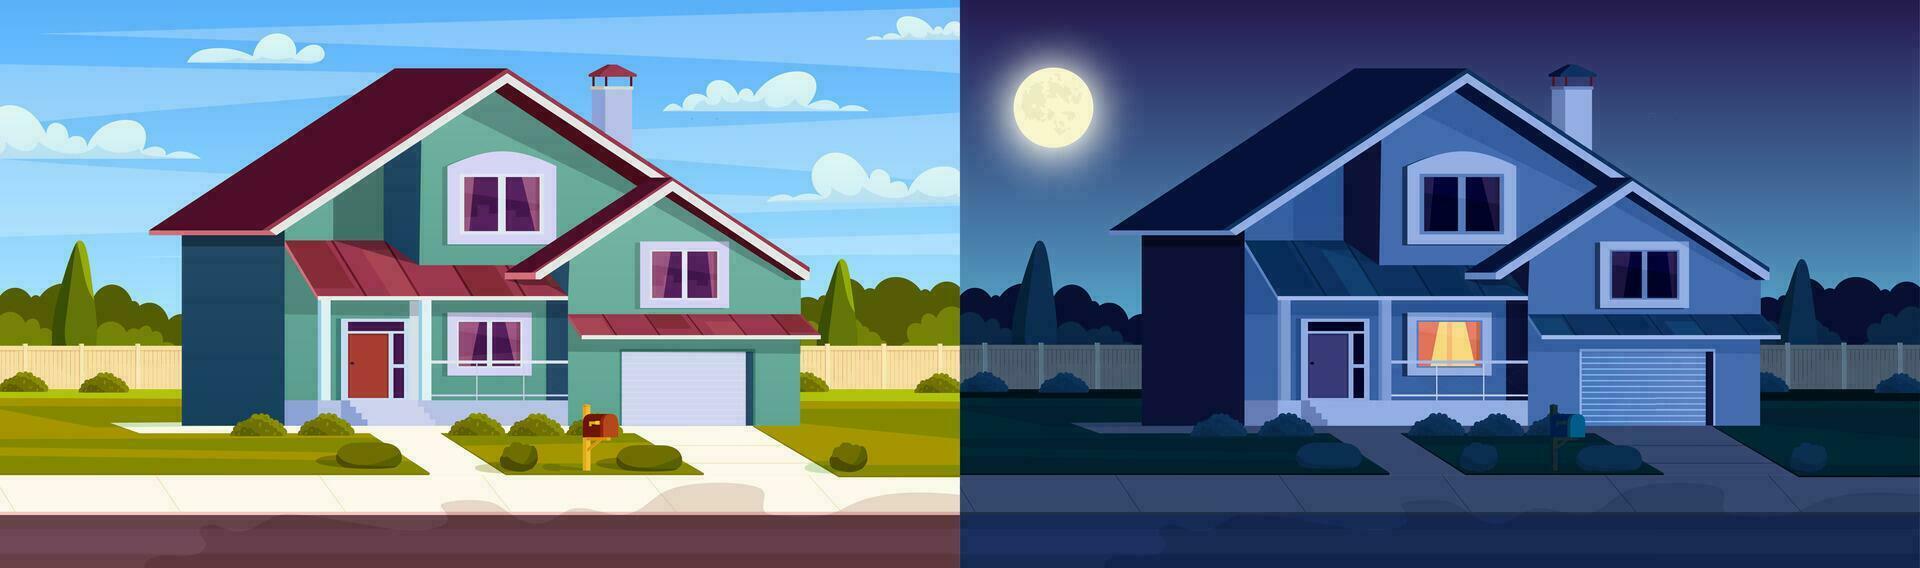 Day and night house. Street in suburb district with residential house. cartoon landscape with suburban cottage. City neighborhood with real estate property. Vector illustration in a flat style